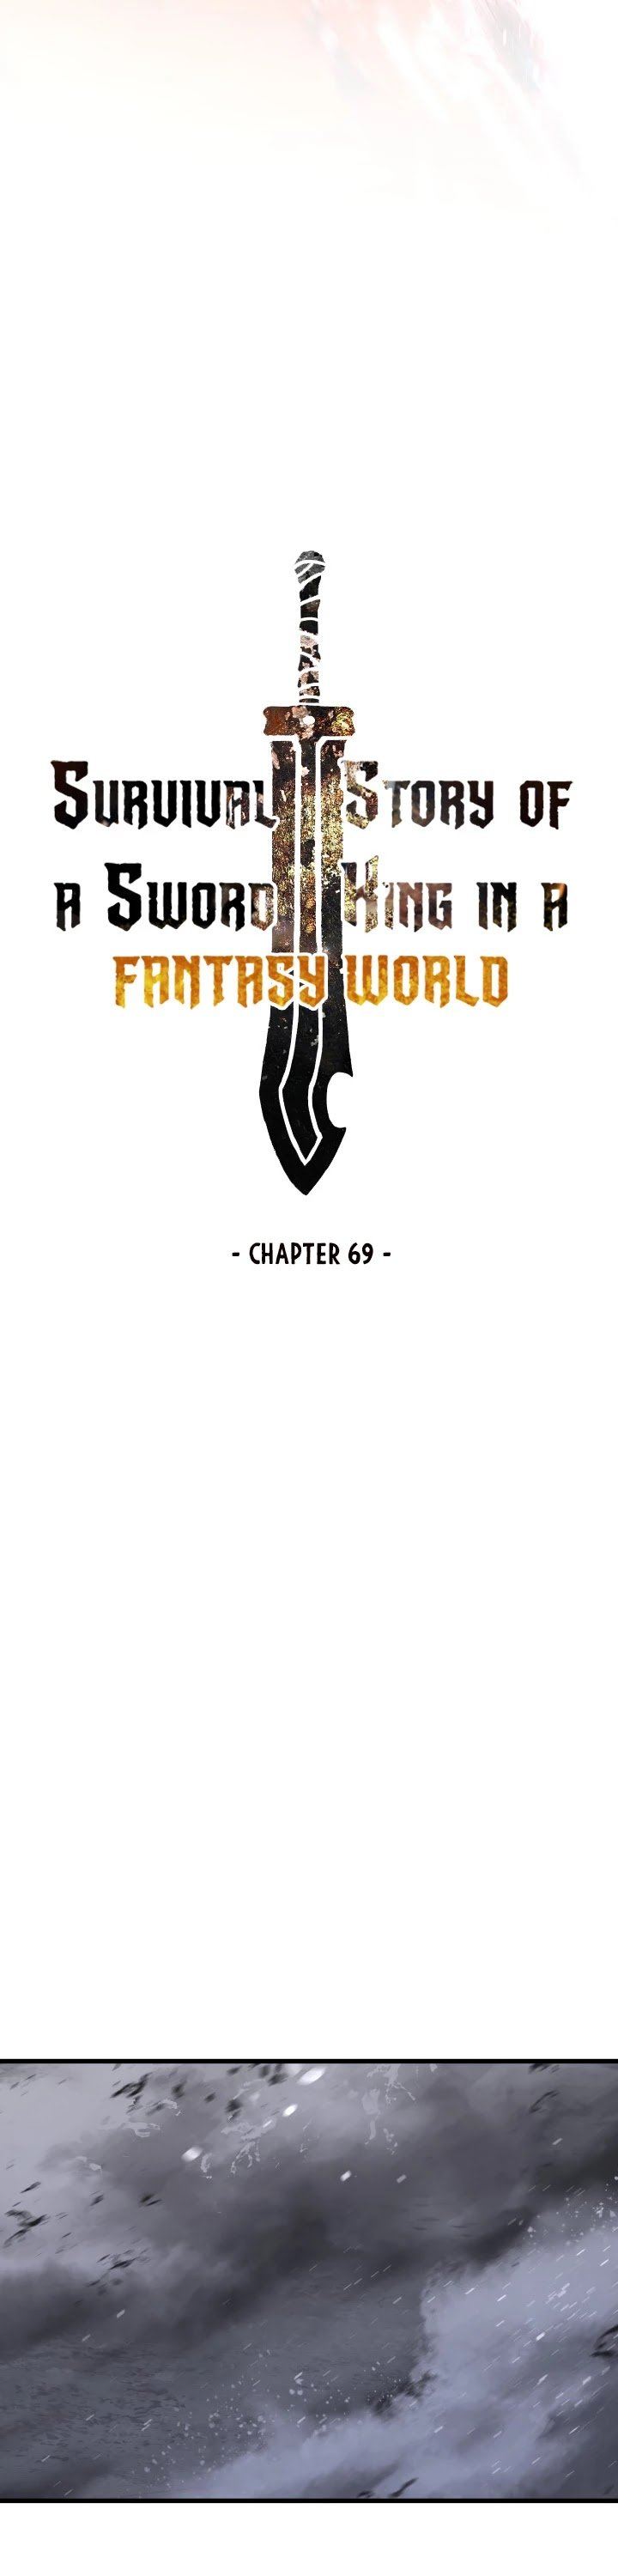 Survival Story Of A Sword King In A Fantasy World 69 7